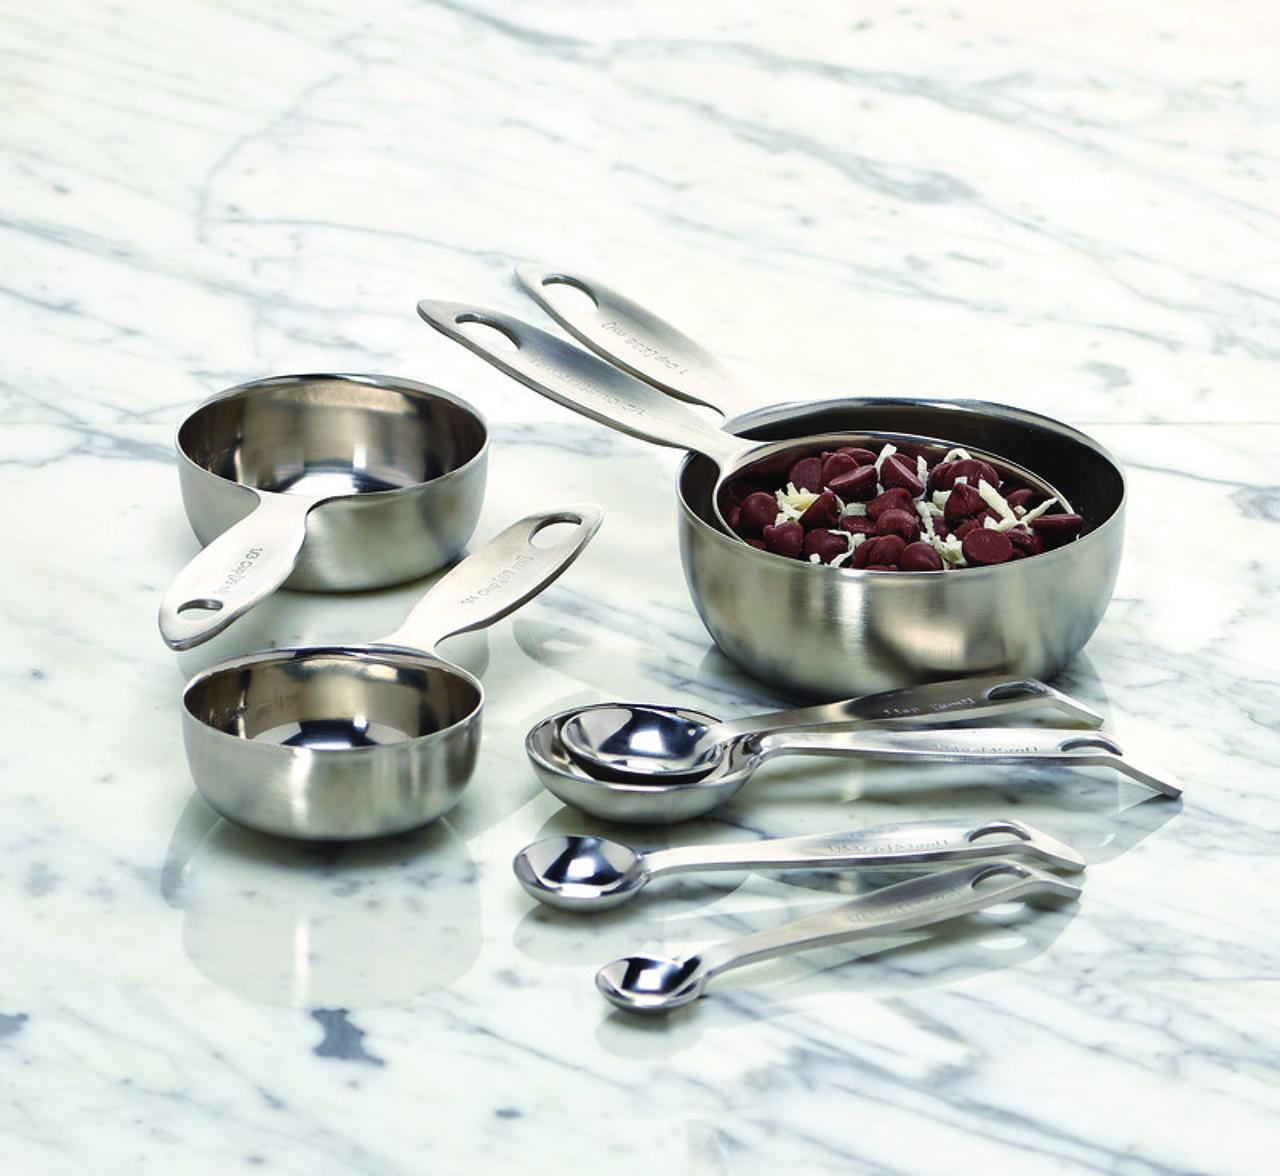 Basic Ingredients by Amco Stainless Steel China Set of 3 Measuring